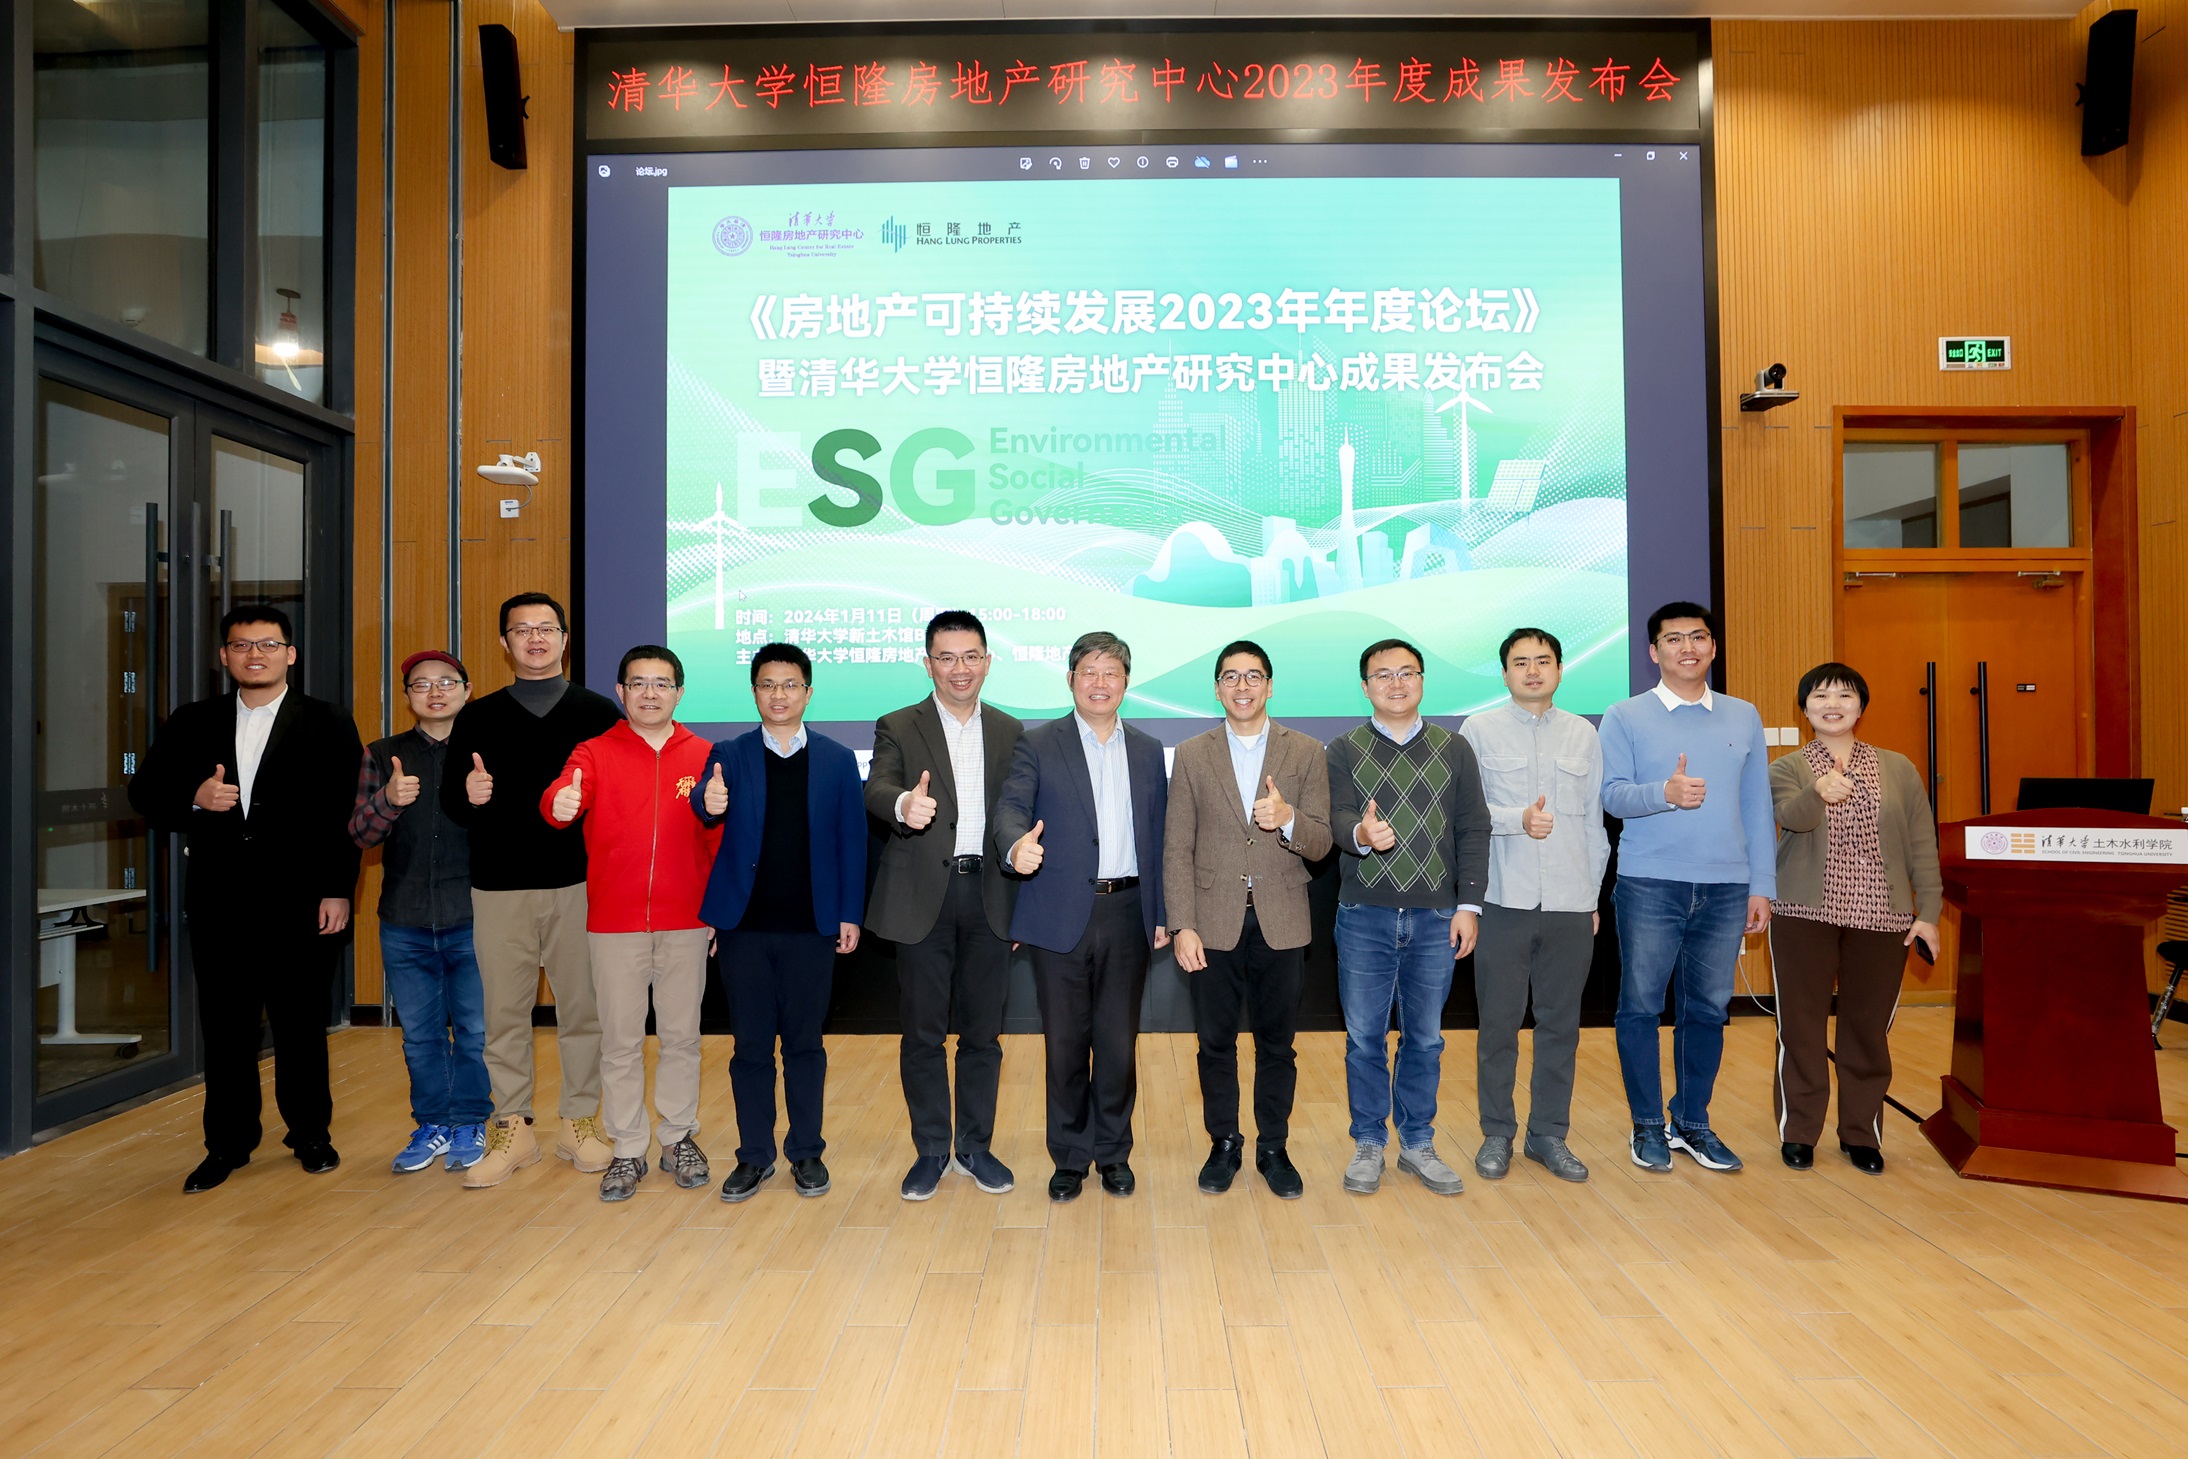 The seven teachers who received funding from the inaugural “Sustainable Real Estate Scheme” present their research findings at the Sustainability in Real Estate Conference, which attracted the participation of Tsinghua University teachers, students, alumni, and experts in the real estate industry